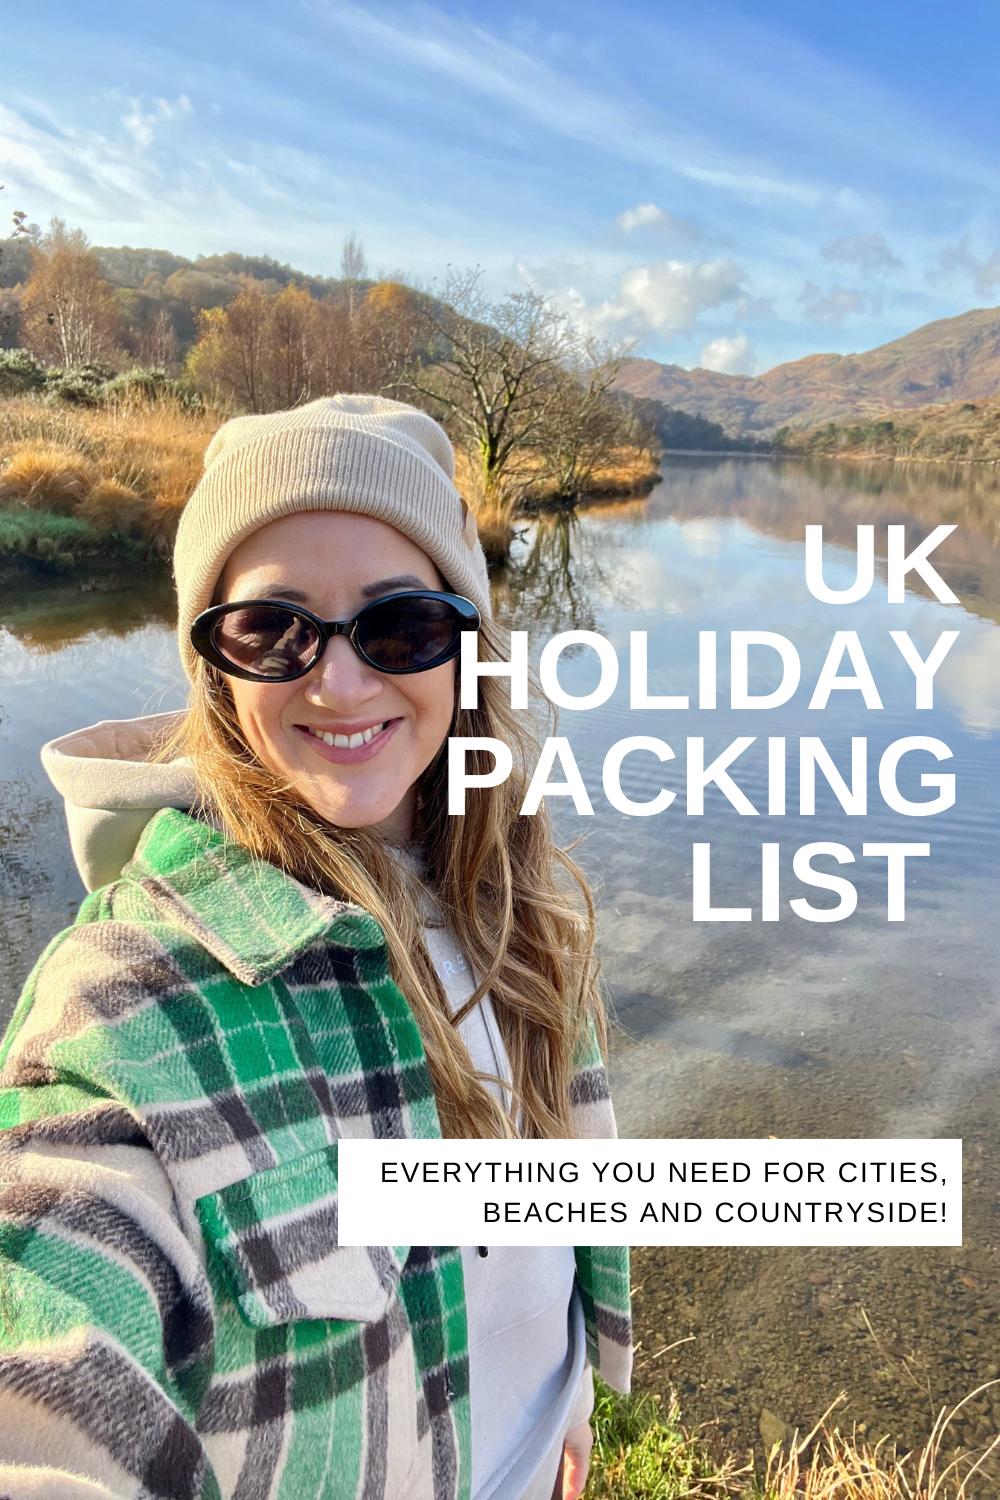 Packing list for a UK holiday